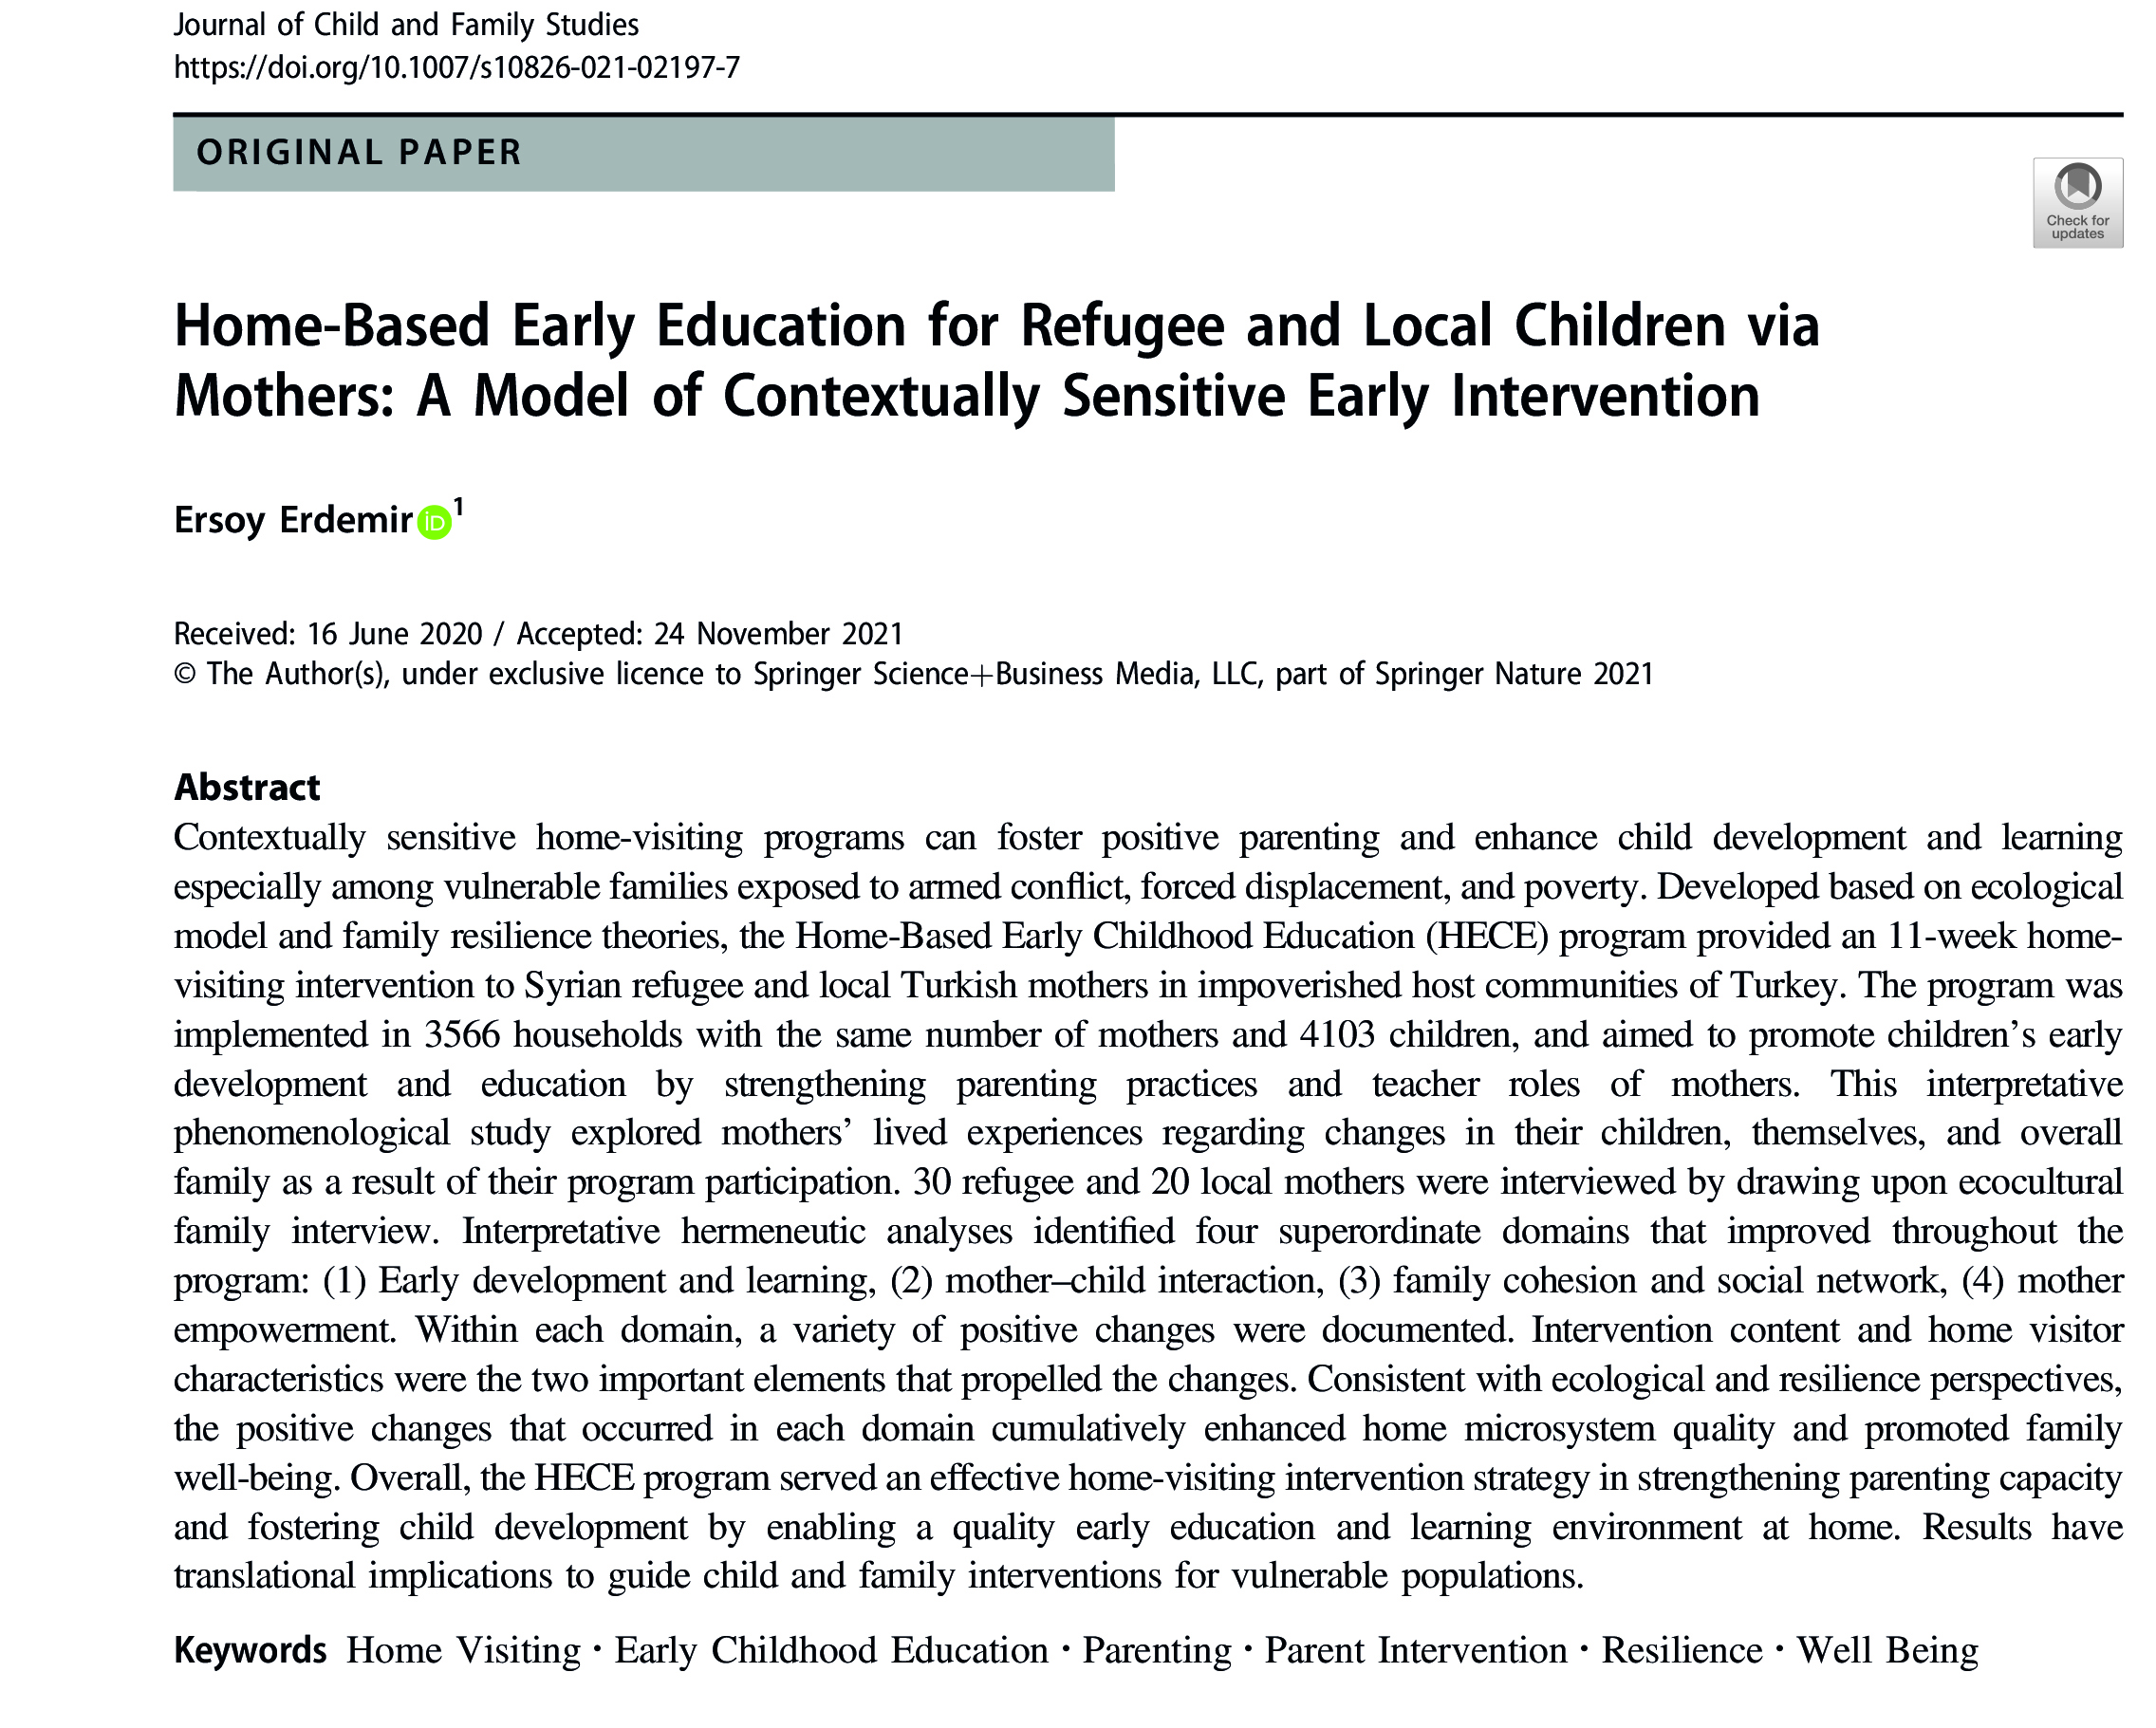 Home-Based Early Education for Refugee and Local Children via Mothers: A Model of Contextually Sensitive Early Intervention